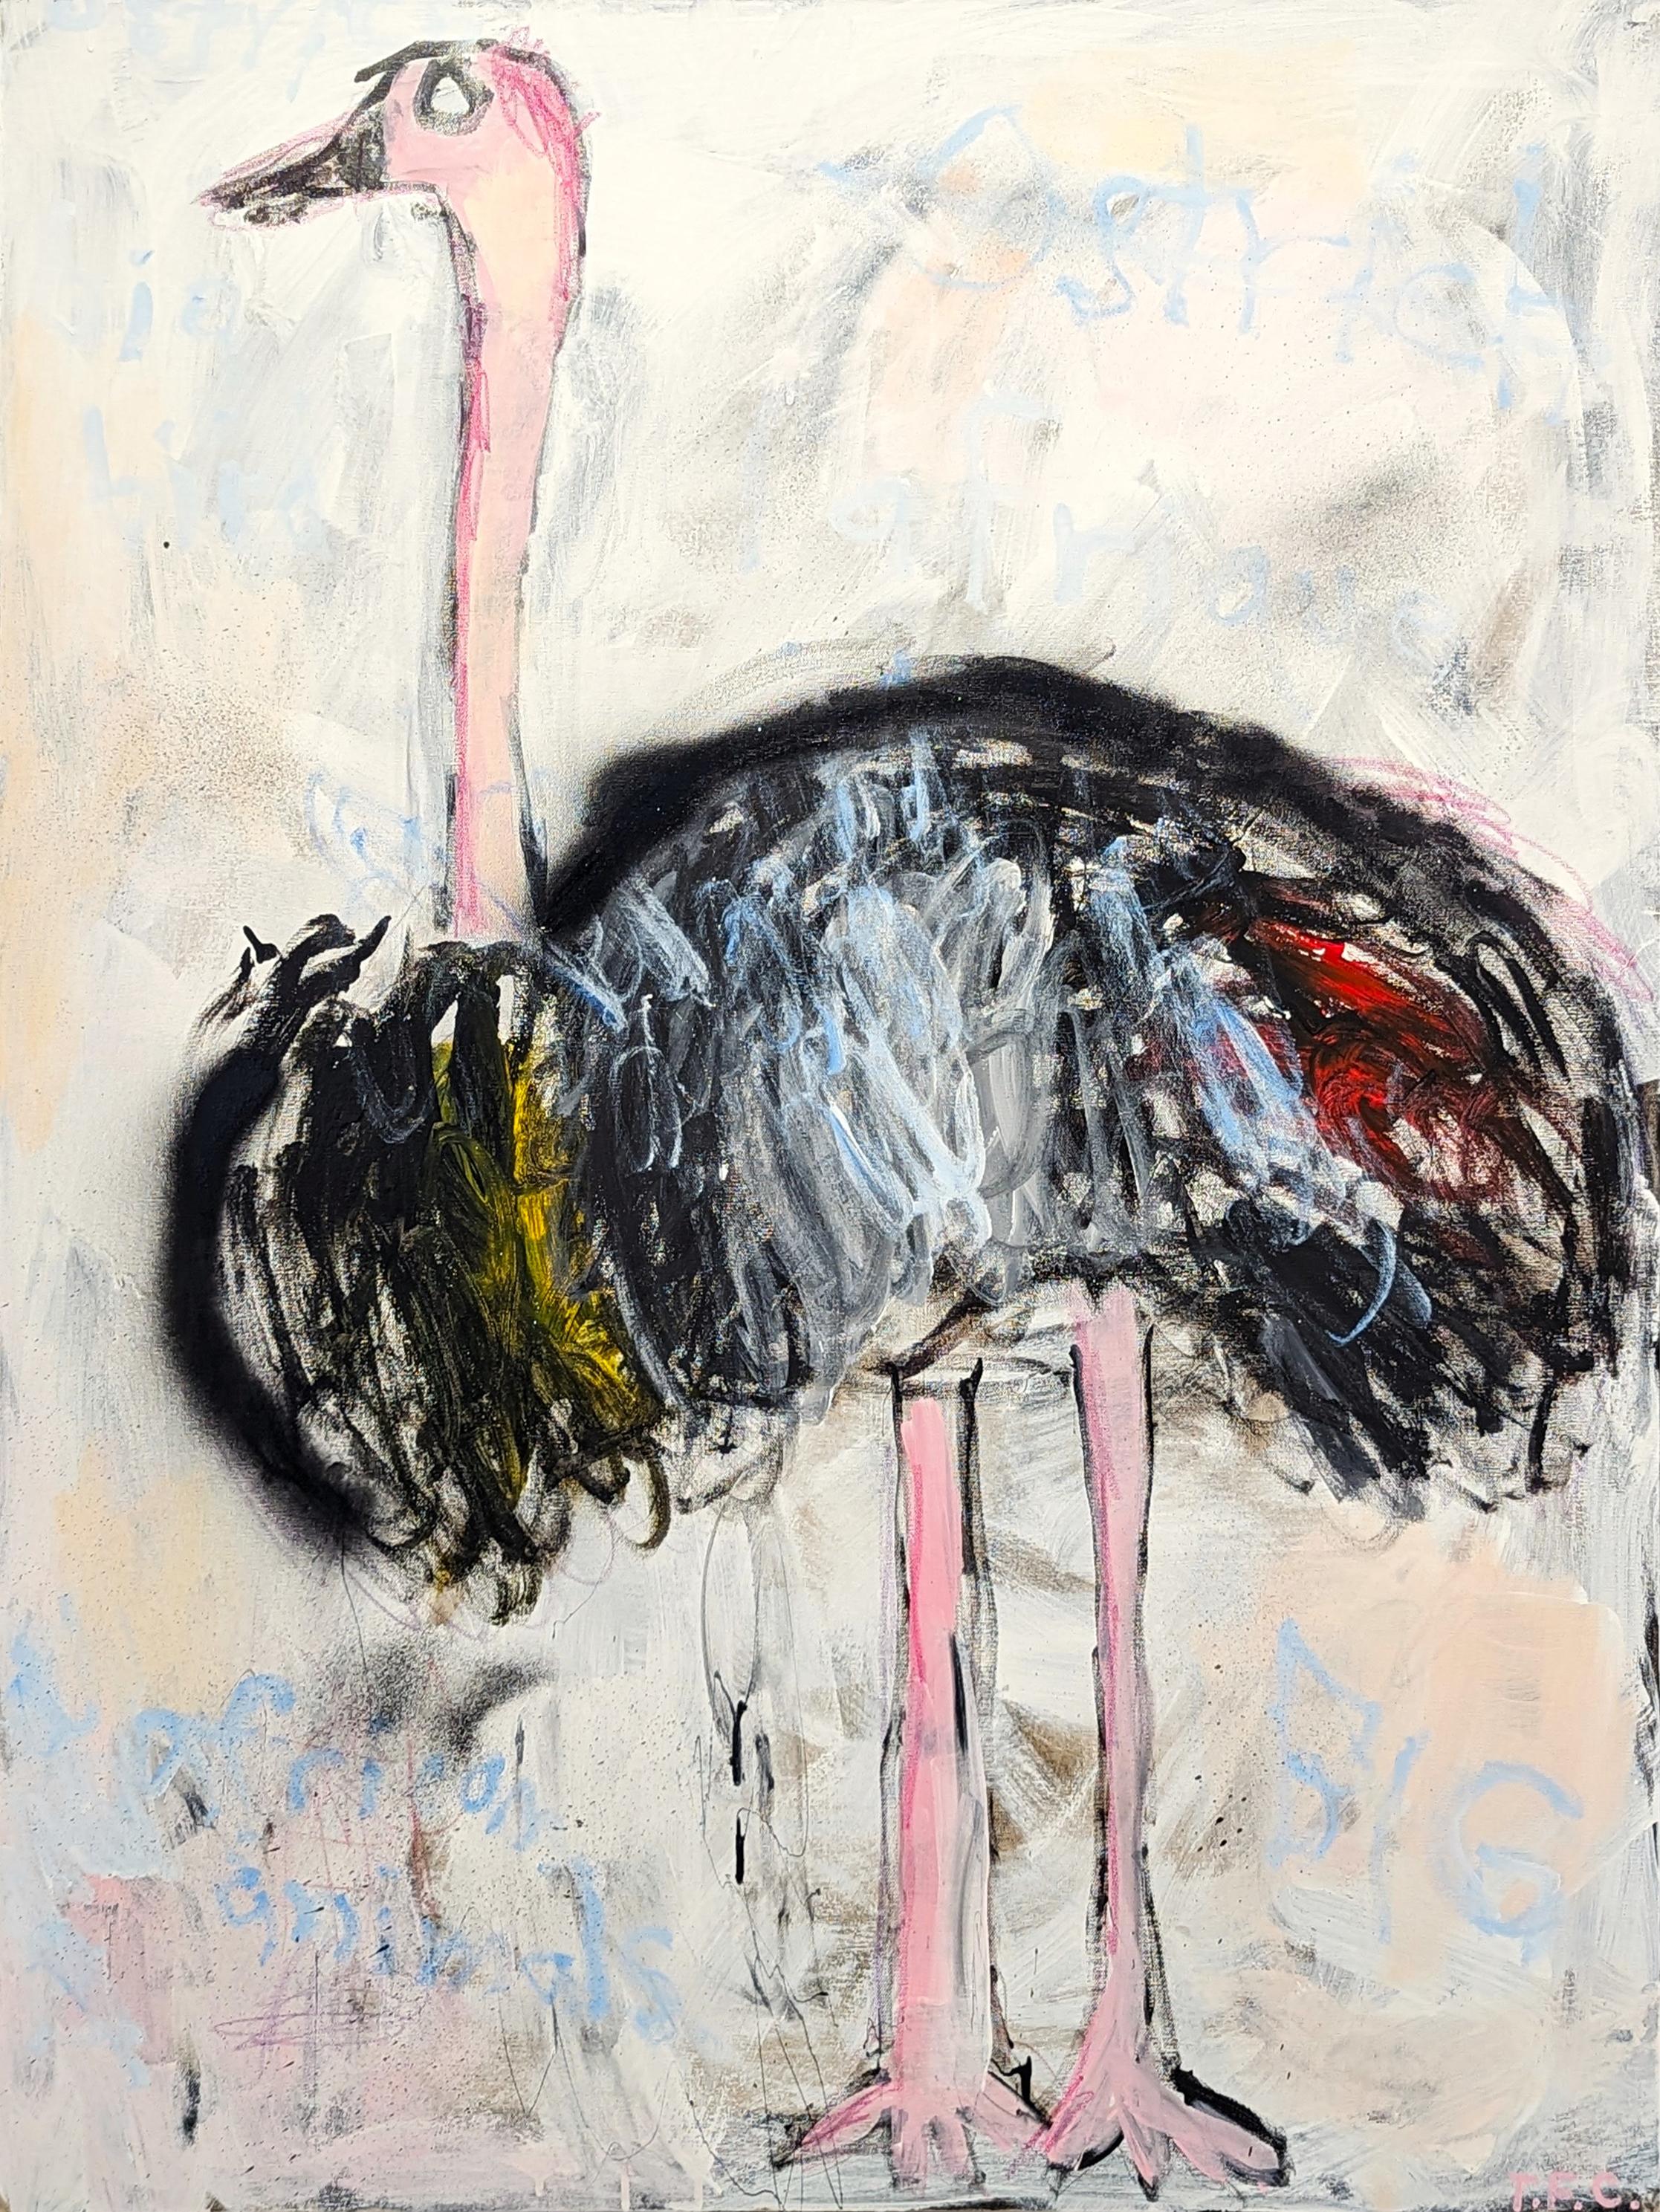 Abstract animal painting by contemporary artist Tyler Casey. The work features a gestural depiction of an ostrich against an off-white background. Signed in the front lower right corner. 

Artist Biography: Tyler Casey is a self-taught diverse